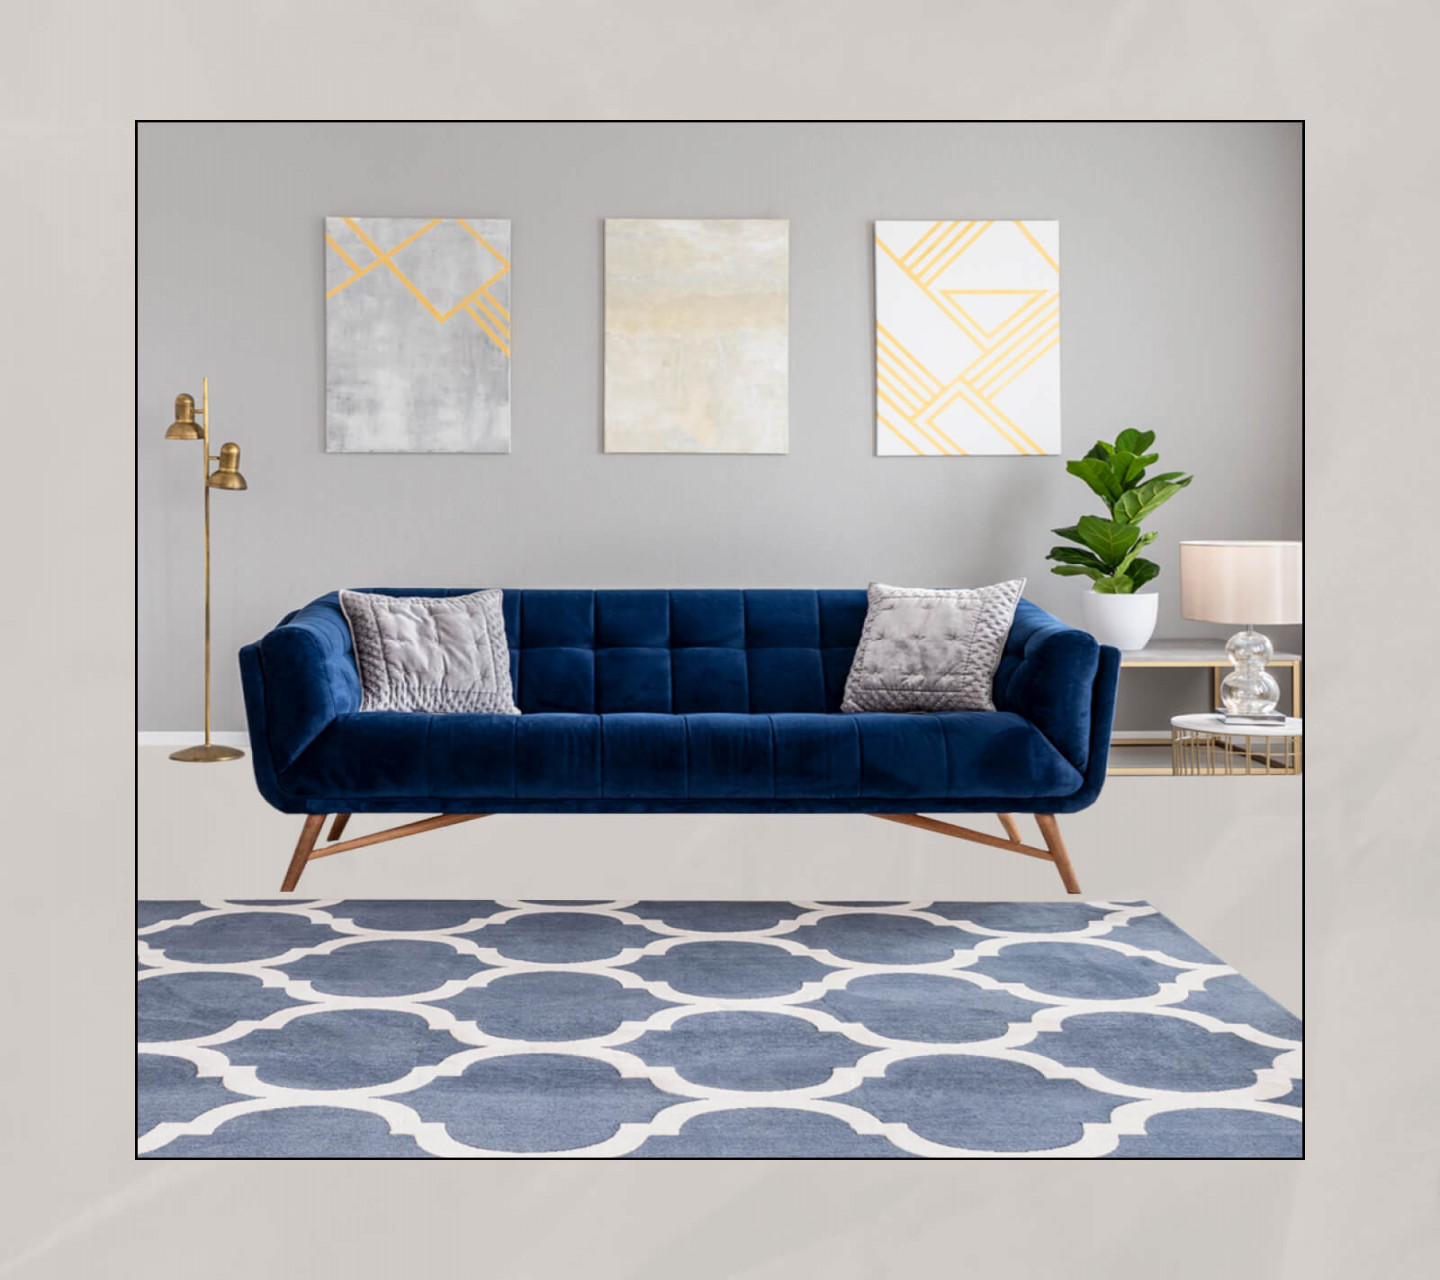 Blue Couch Living Room Ideas:  Ways to Style a Blue Couch from